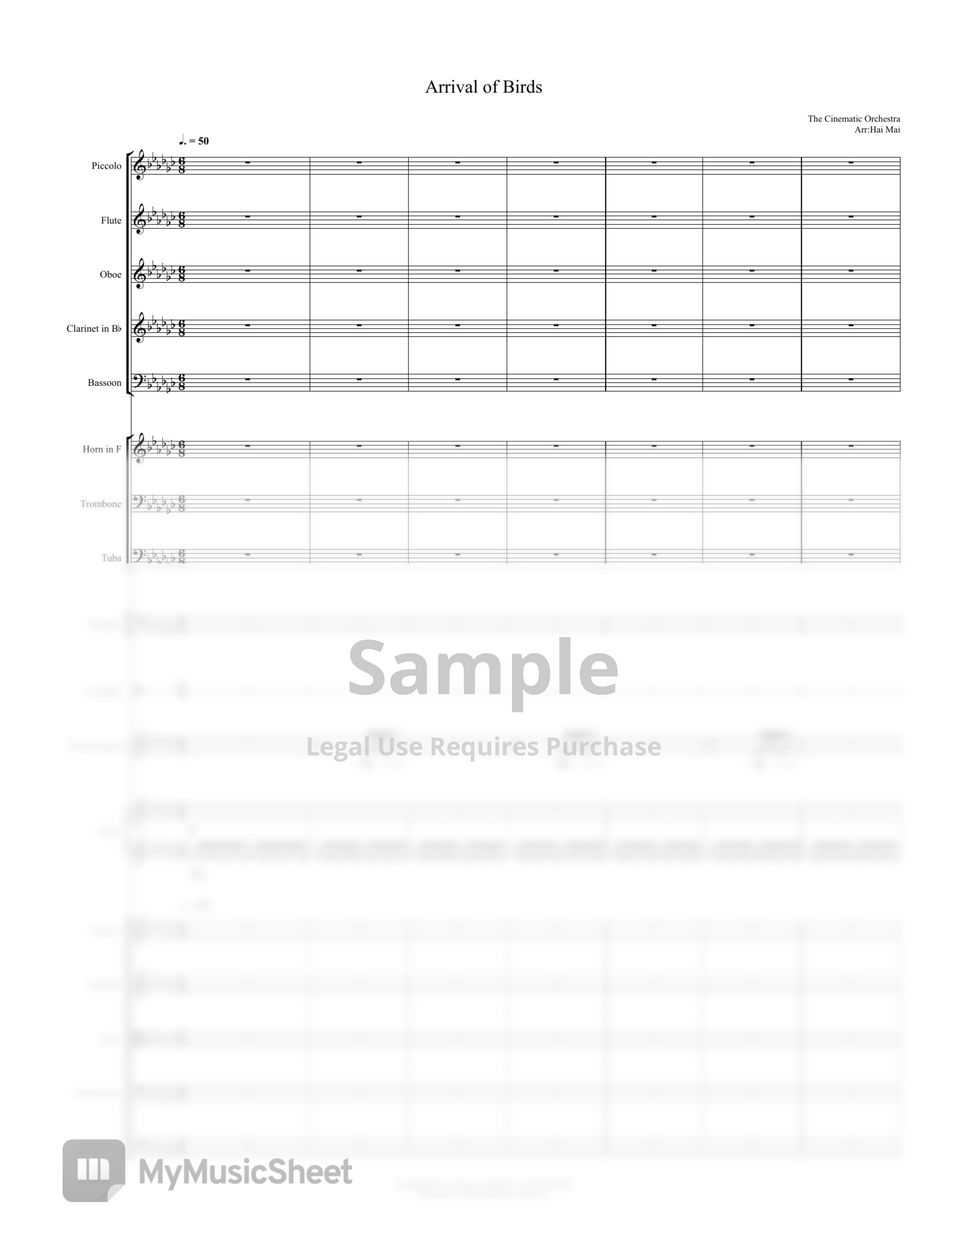 The Cinematic Orchestra - Arrival of Birds for Orchestra - Full Score by Hai Mai